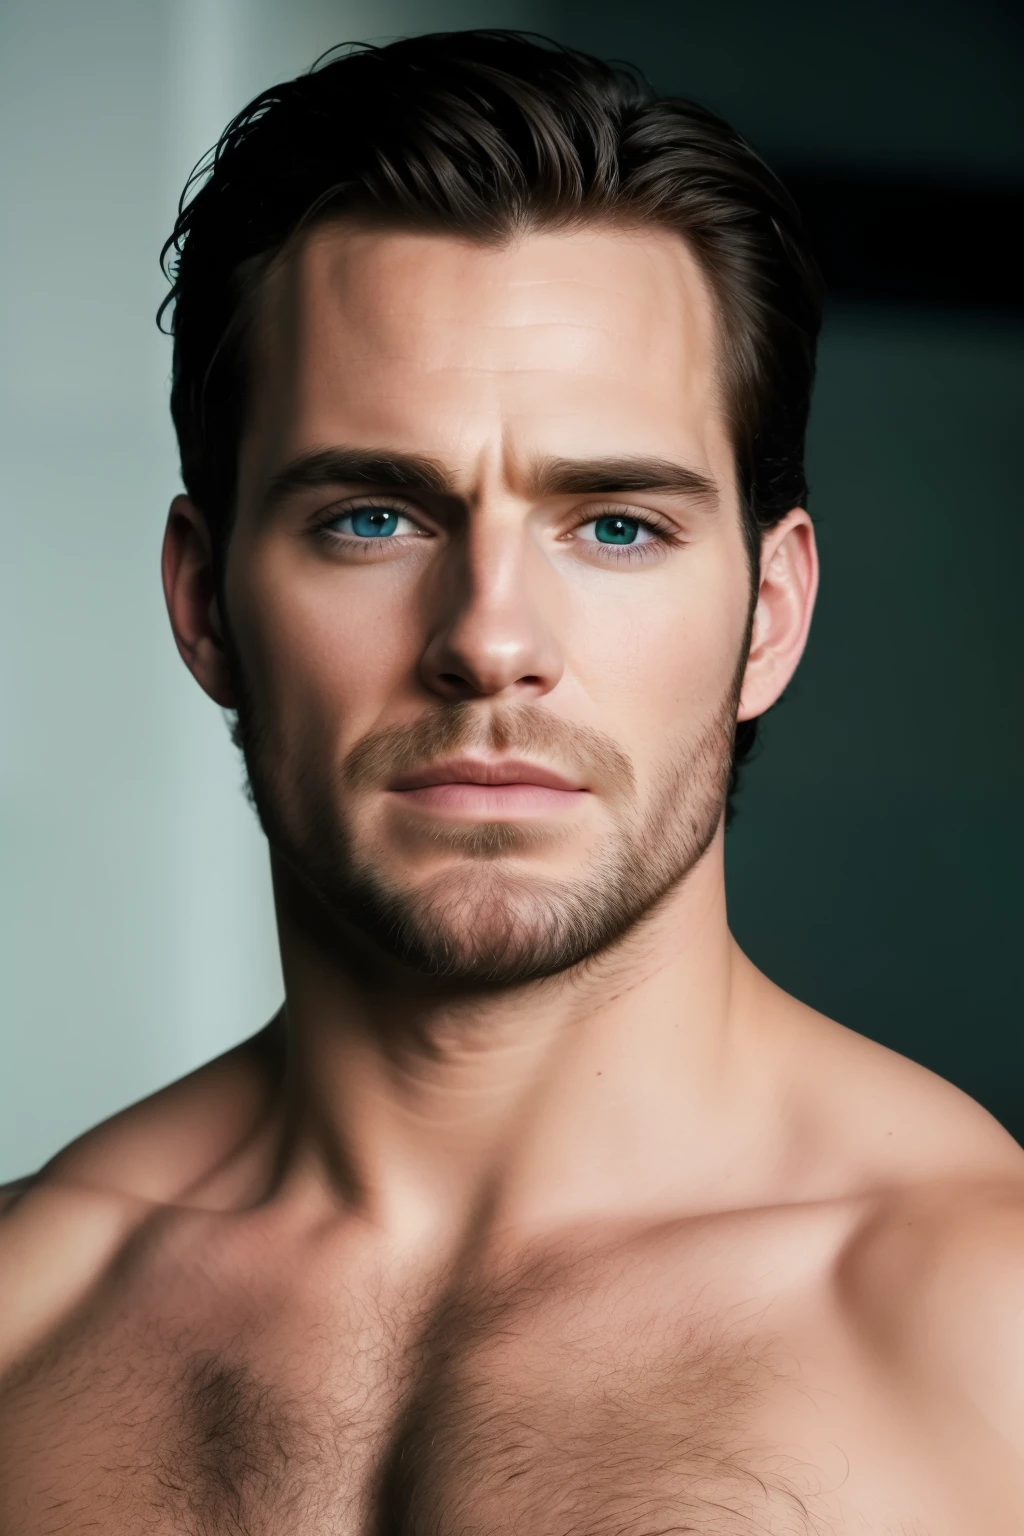 A striking photorealistic portrait of Henry Cavill and Chris Evans merged into one, showcasing the best features of both men. The image captures the sharp jawline, piercing blue eyes, and defined eyebrows of Henry Cavill, while the chiseled jaw, green eyes, and tousled hair of Chris Evans are also prominently displayed. The detailed facial structures and realistic skin texture add to the lifelike appearance of this masterpiece. The lighting creates cinematic depth, casting subtle shadows and highlighting every intricate detail. (Photorealistic: 1.5, High Detail: 1.2, RAW Photography: 1.8, Ultra HD: 1